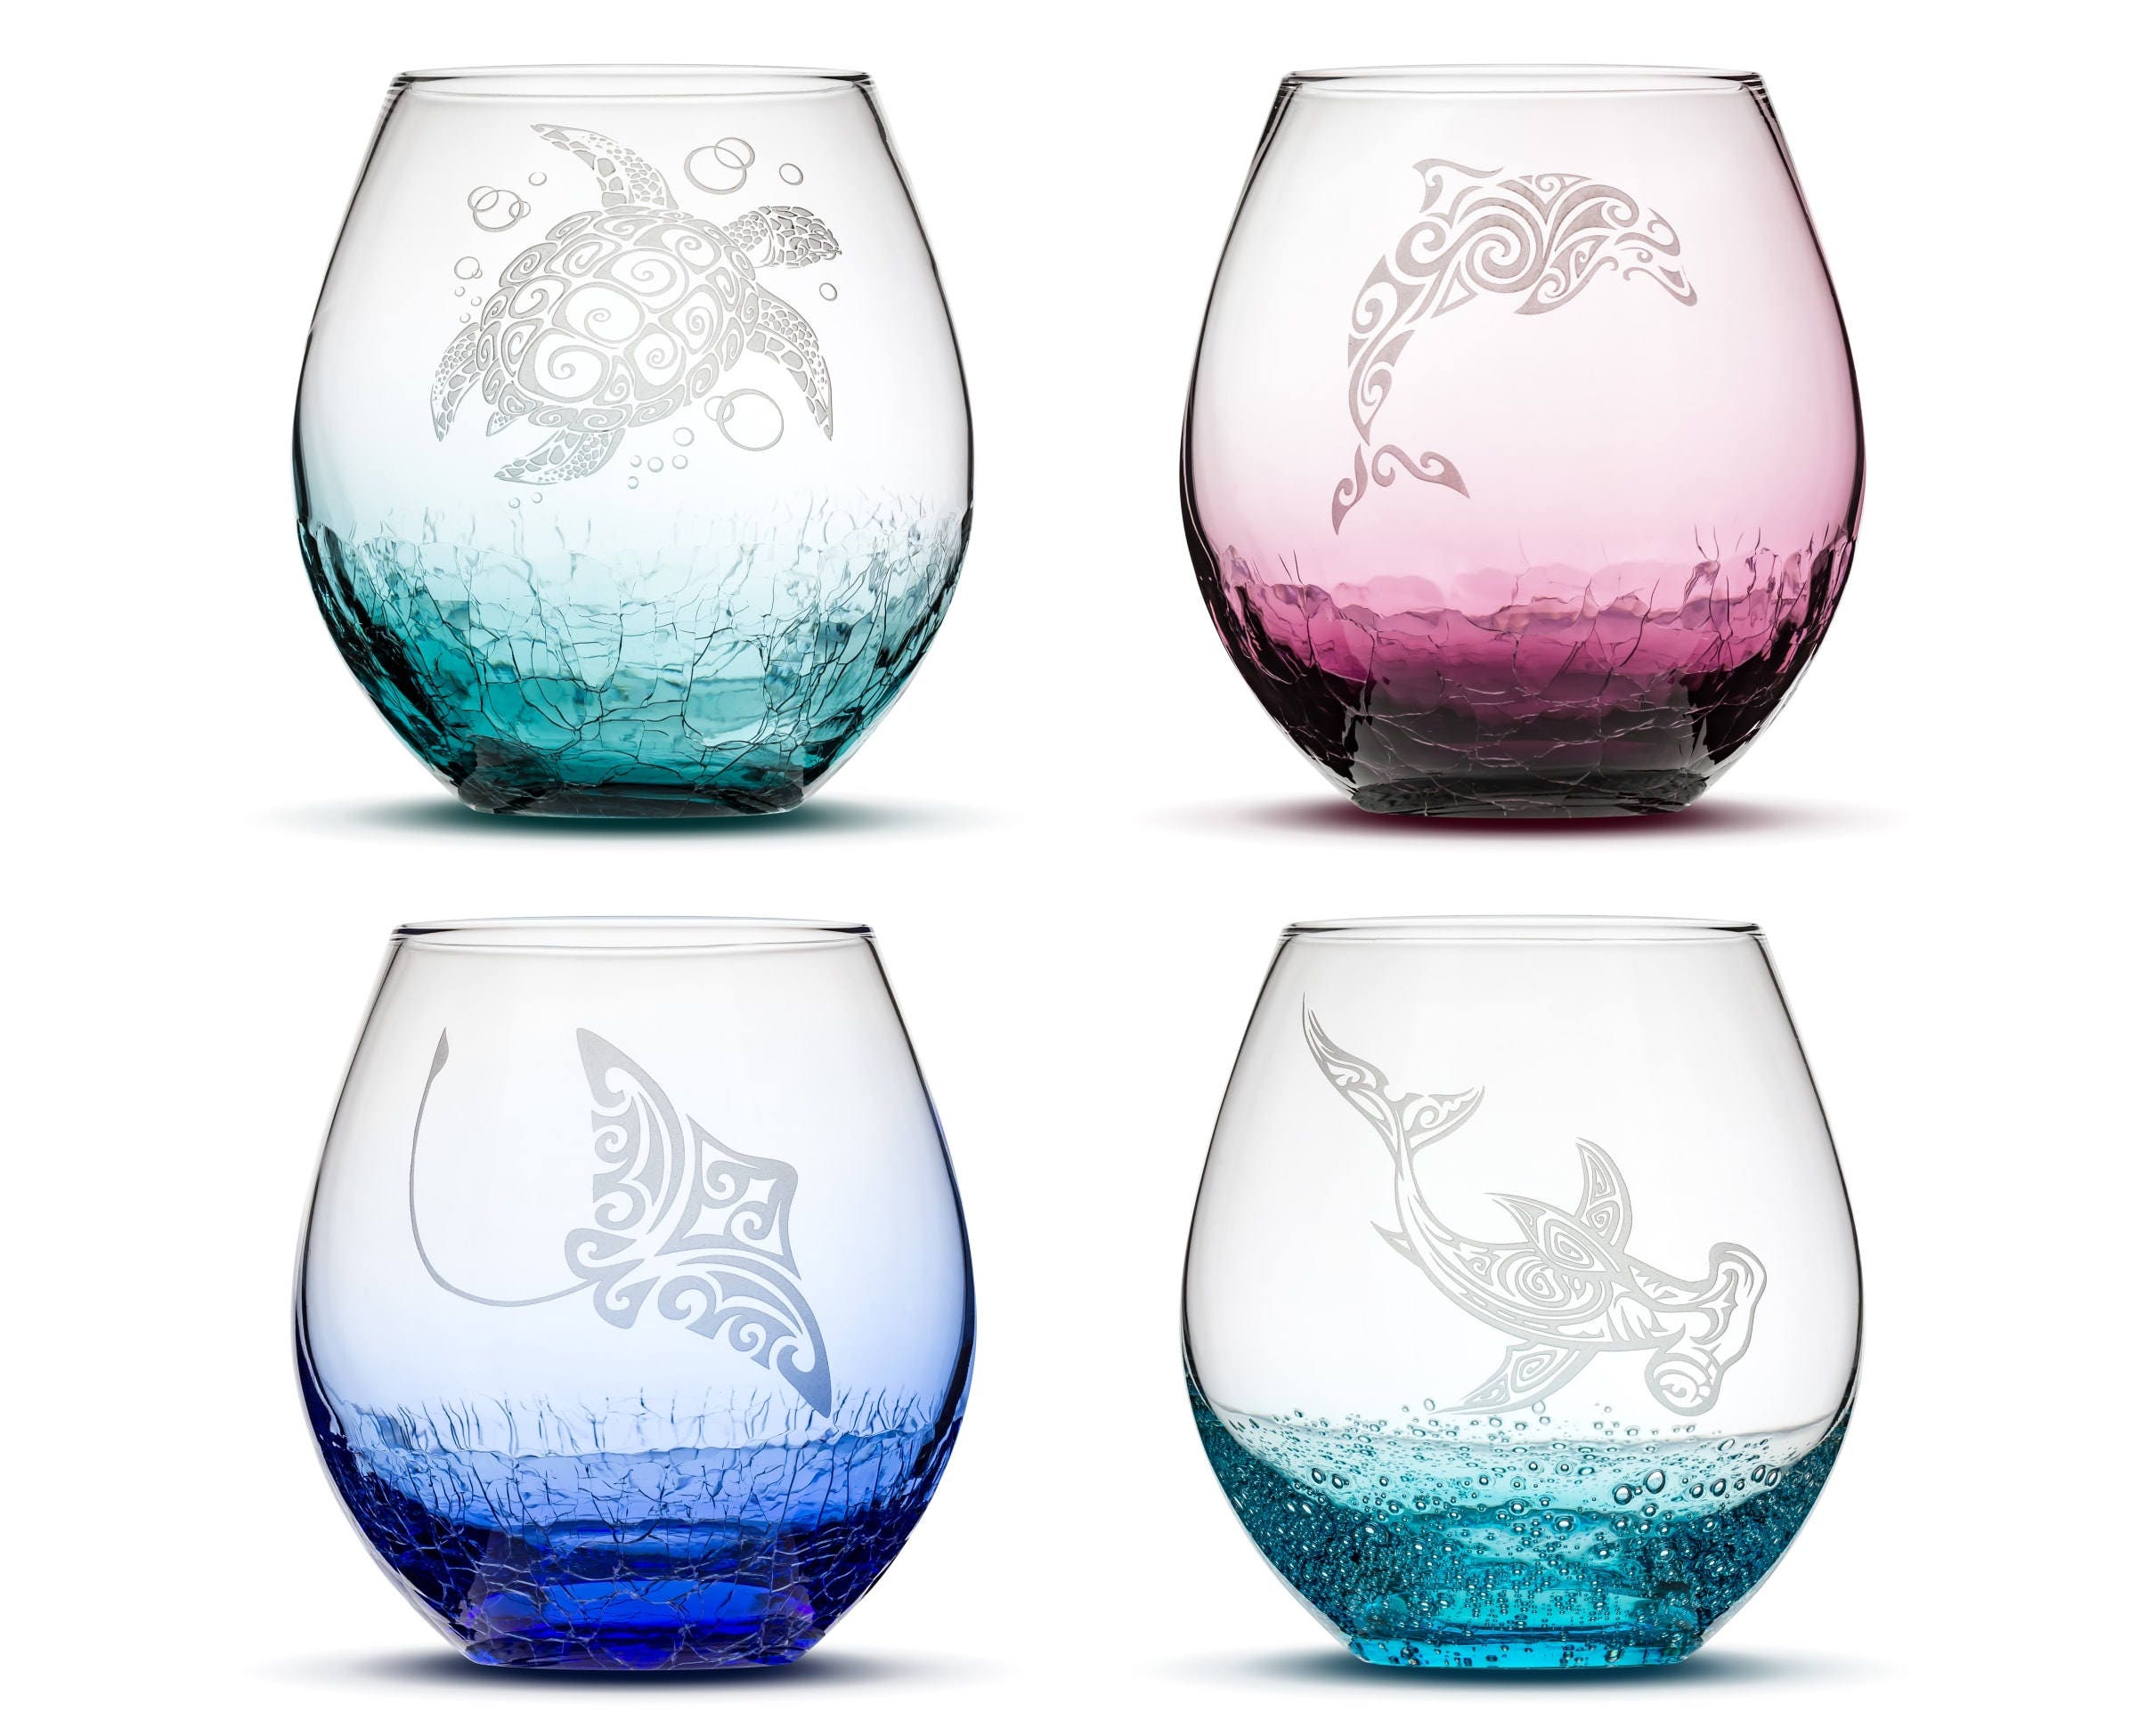 Set of 4, Etched Wine Glasses, Handblown Crackle, Tribal Sea Animals, Sand Carved by Integrity Bottles